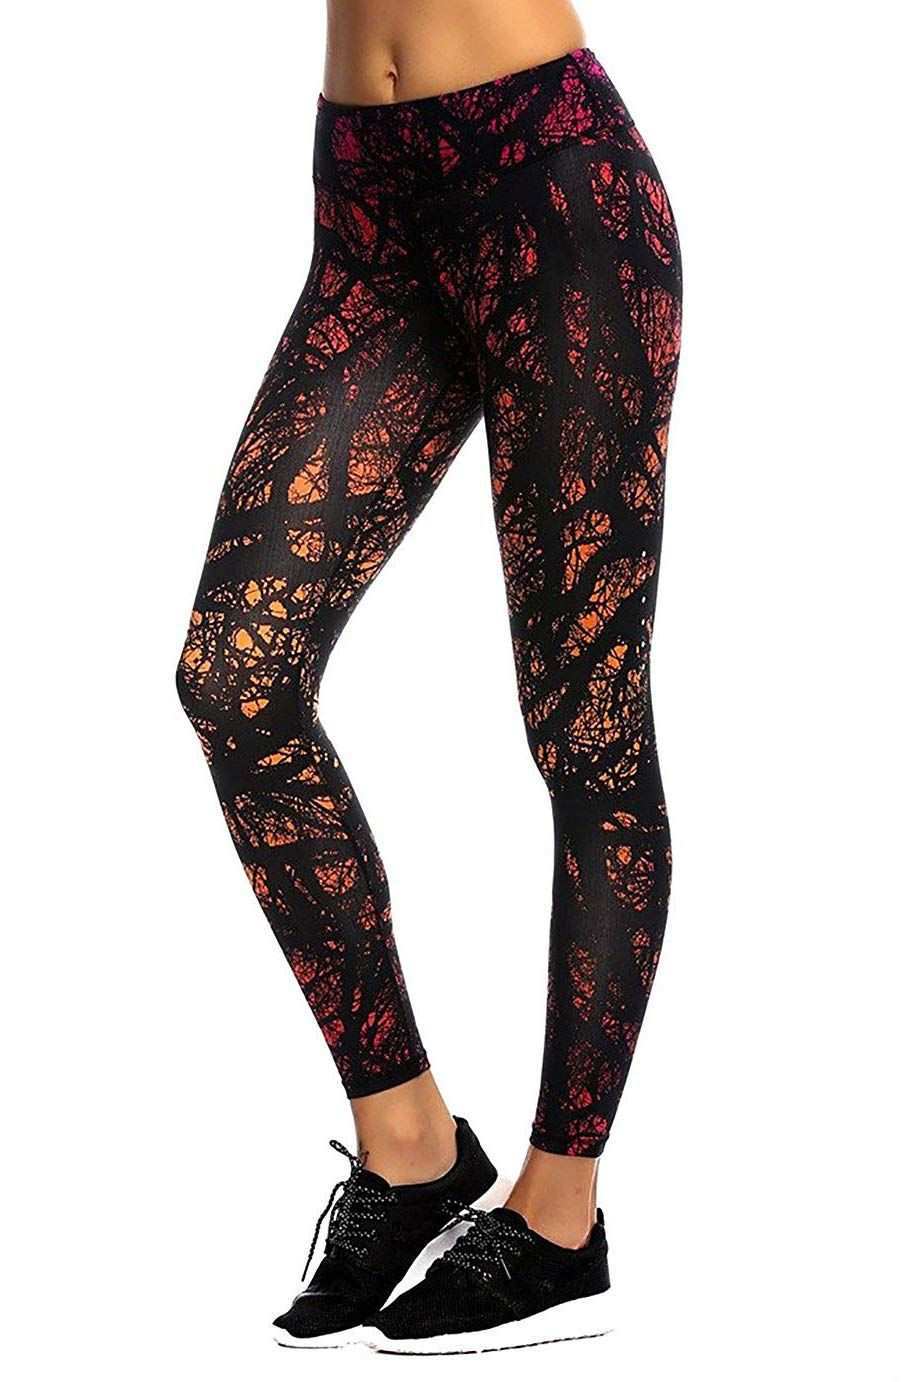 Schwarze Leggings Mit Muster Fur S Gym Oder Ein Casual Outfit Outfit Bedruckte Leggings Legging